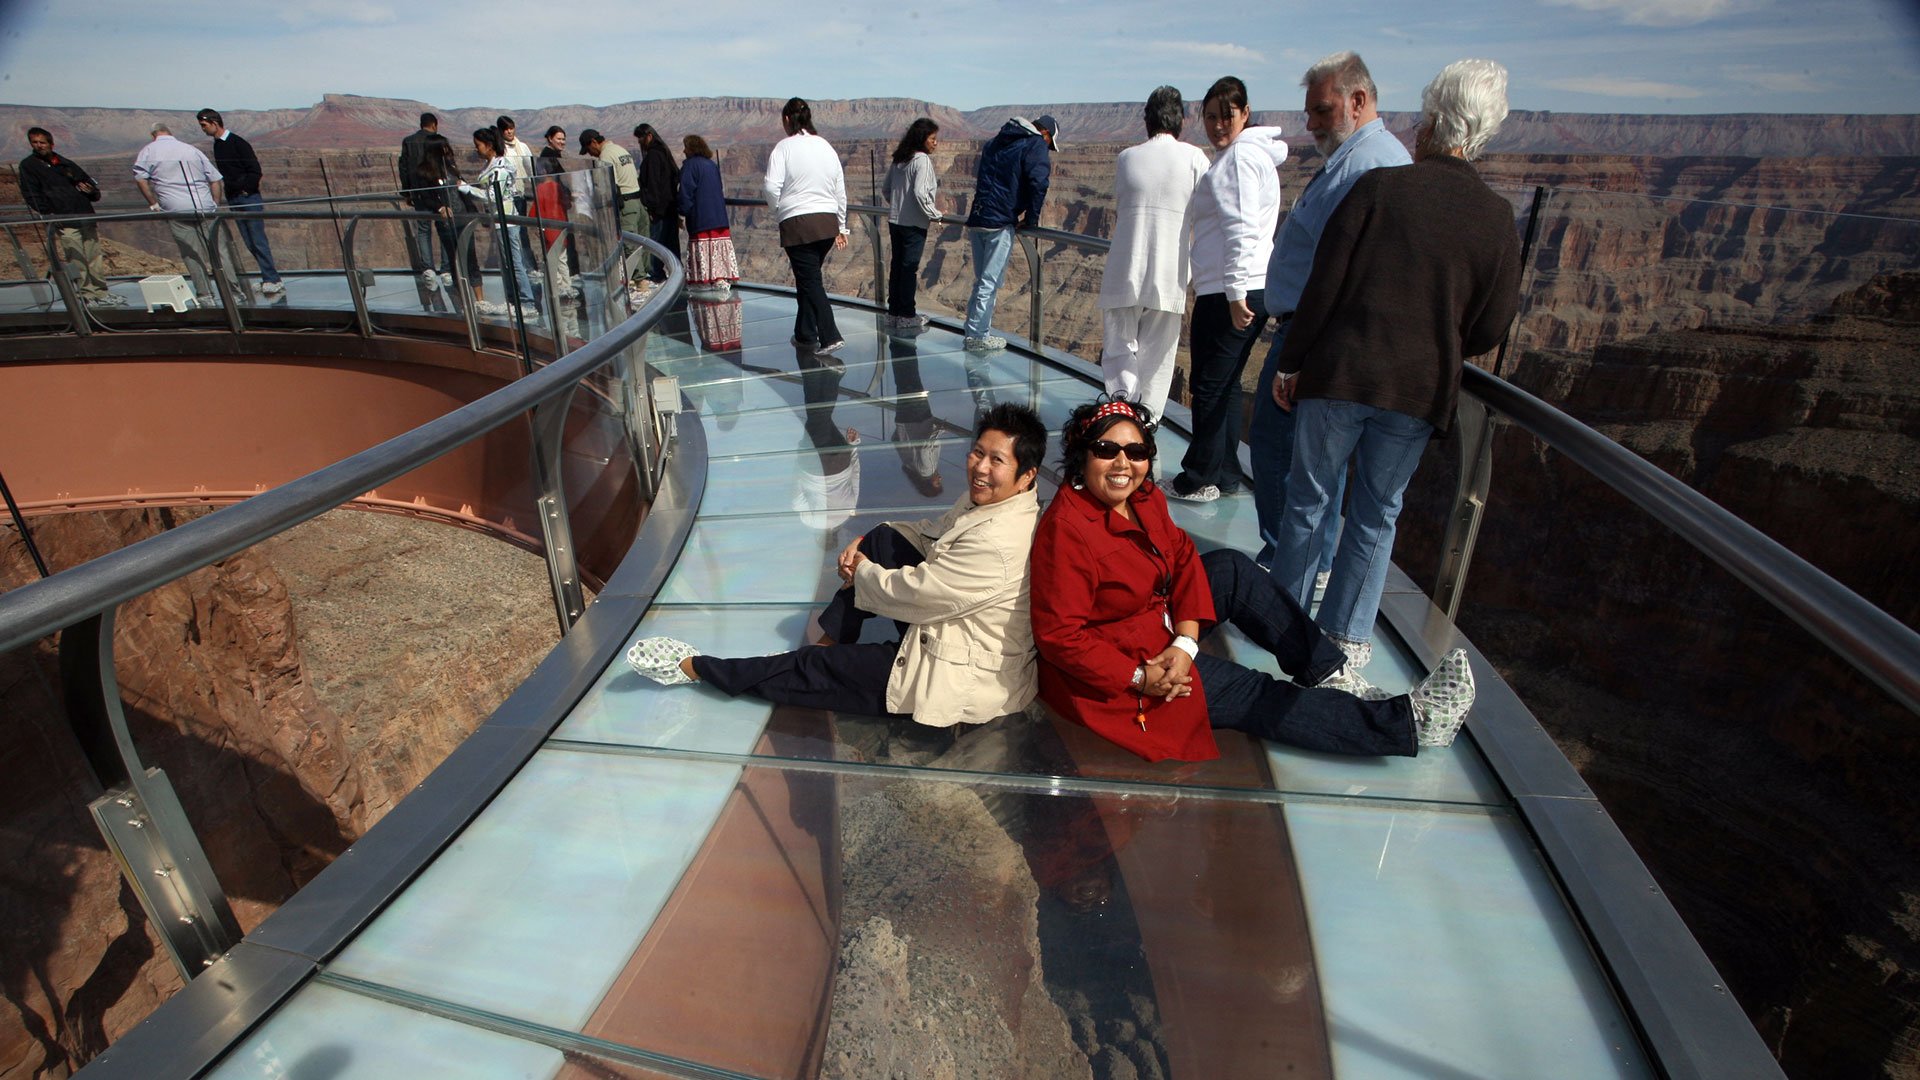 Two women sitting on the glass floor of the Skywalk posing for a photo.